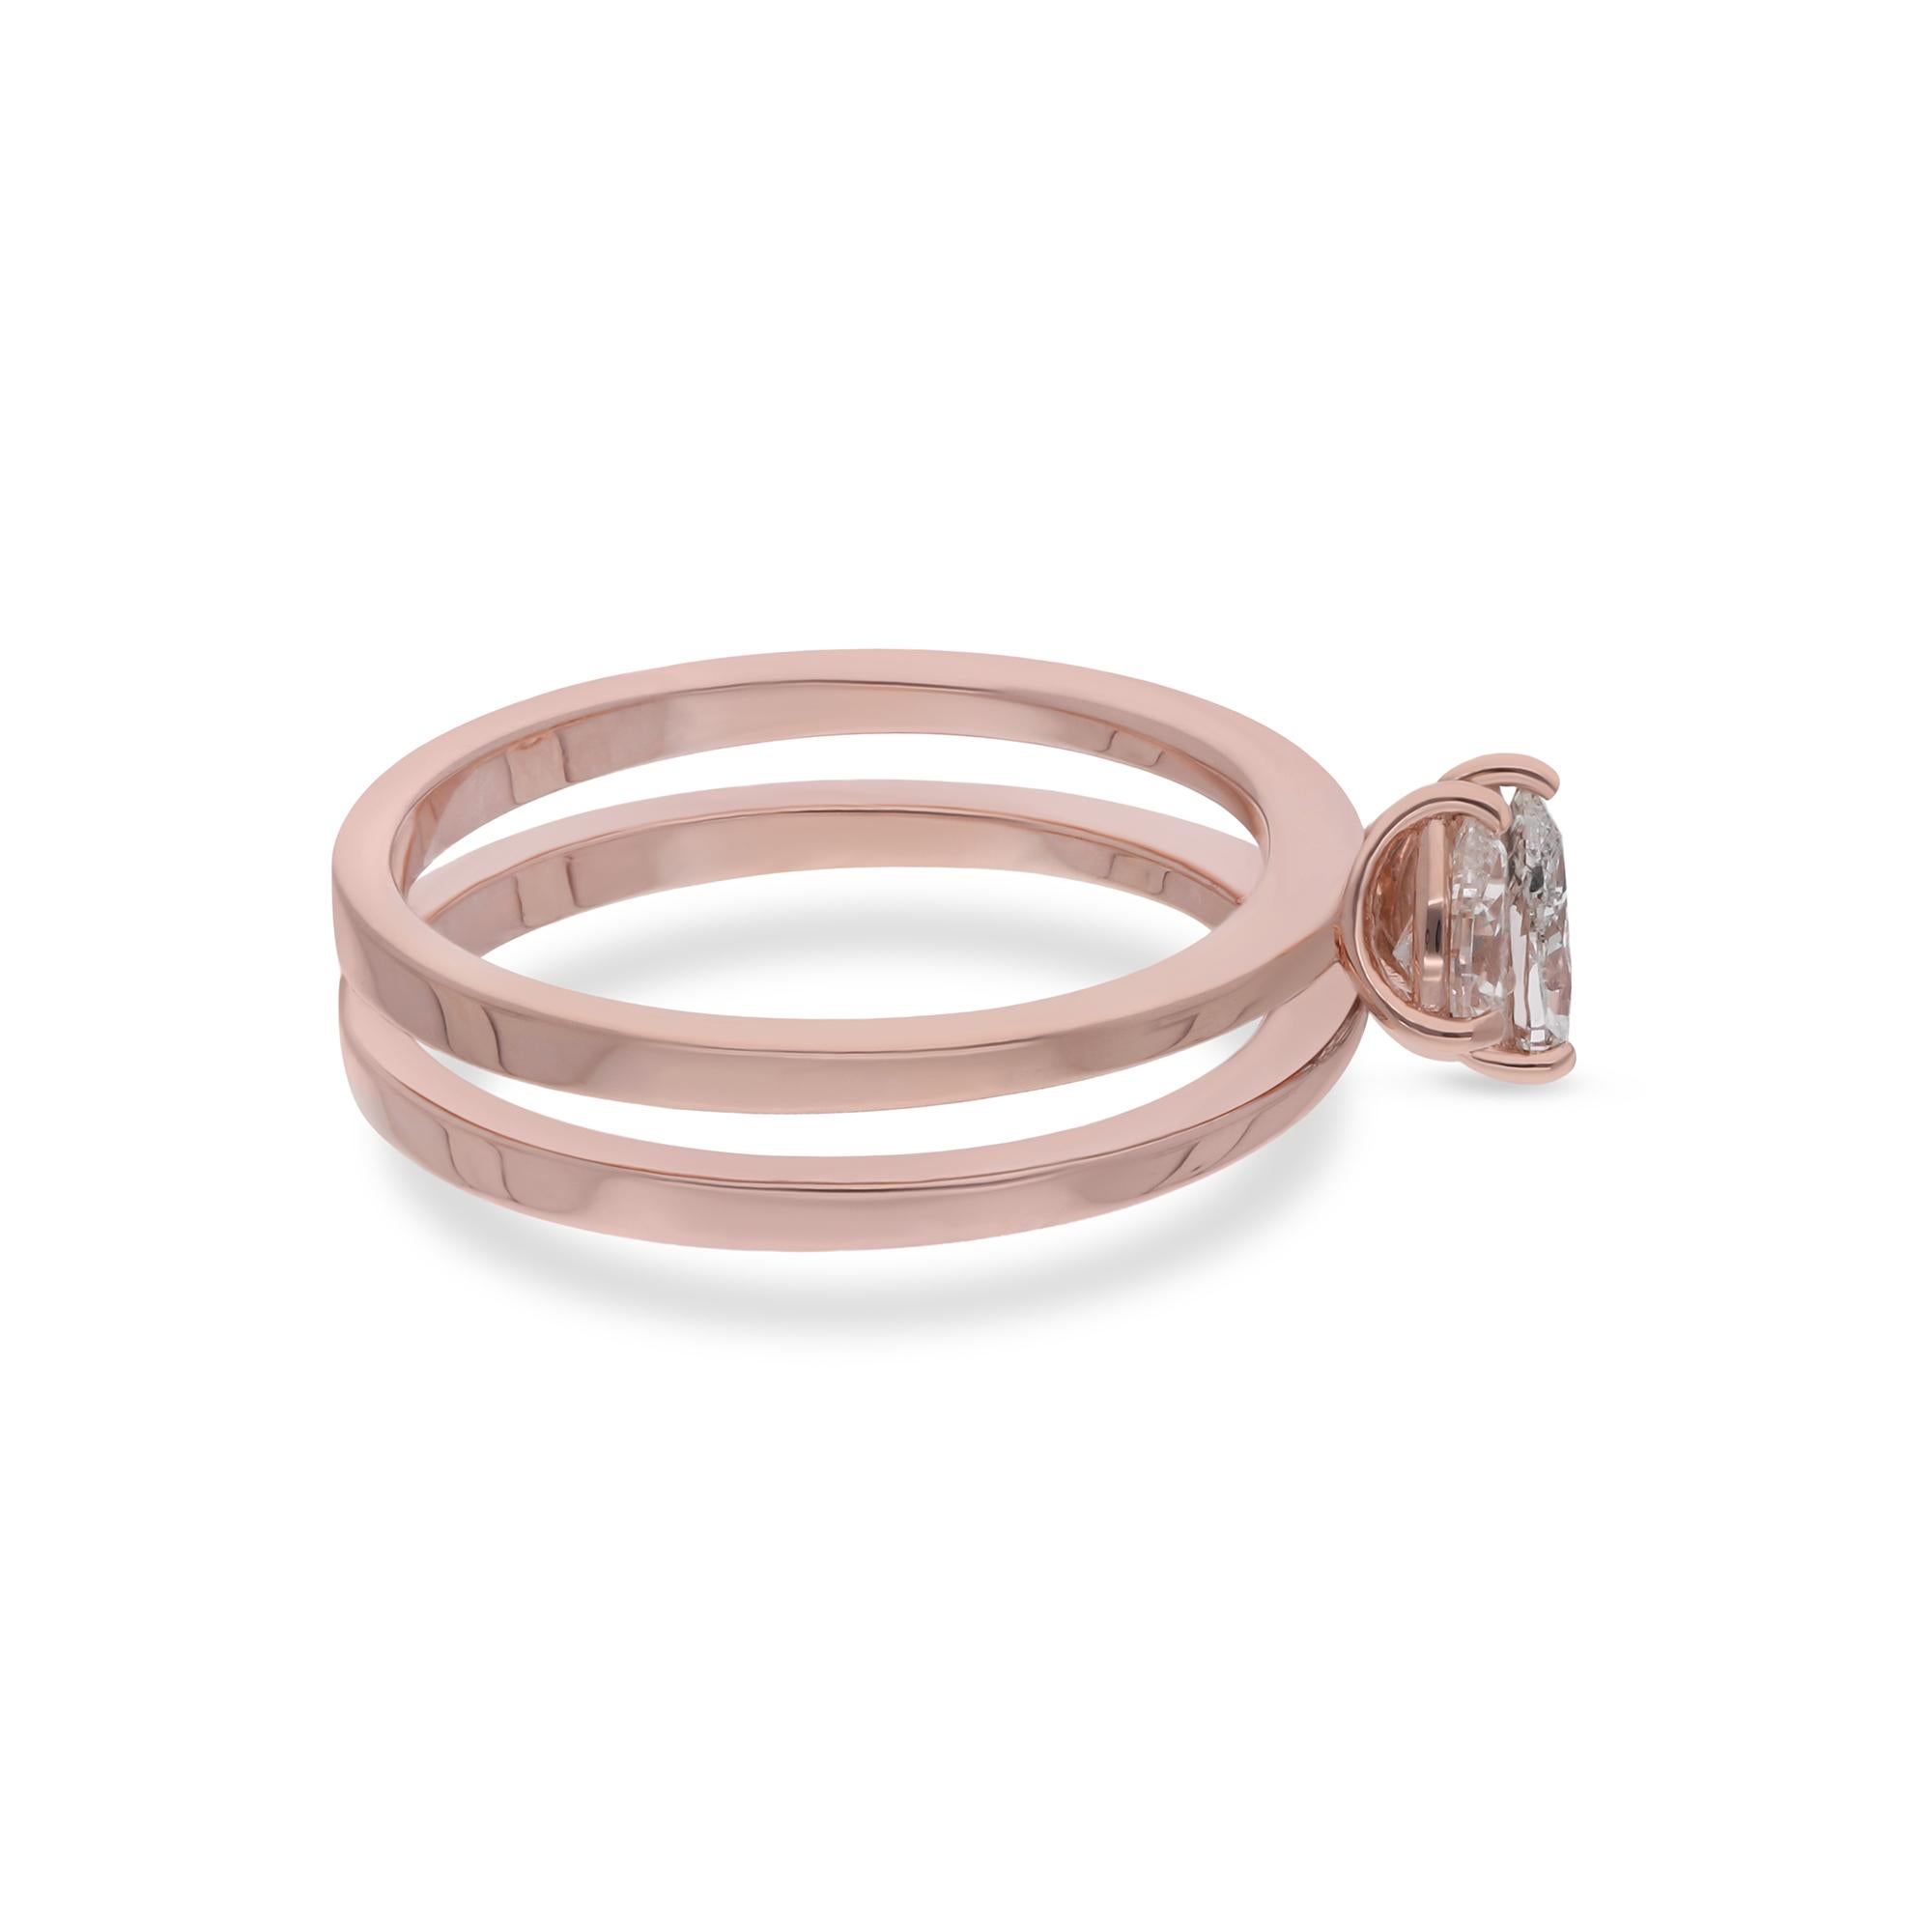 Modern Natural 0.95 Carat Pear Shaped Diamond Band Ring 18 Karat Rose Gold Fine Jewelry For Sale